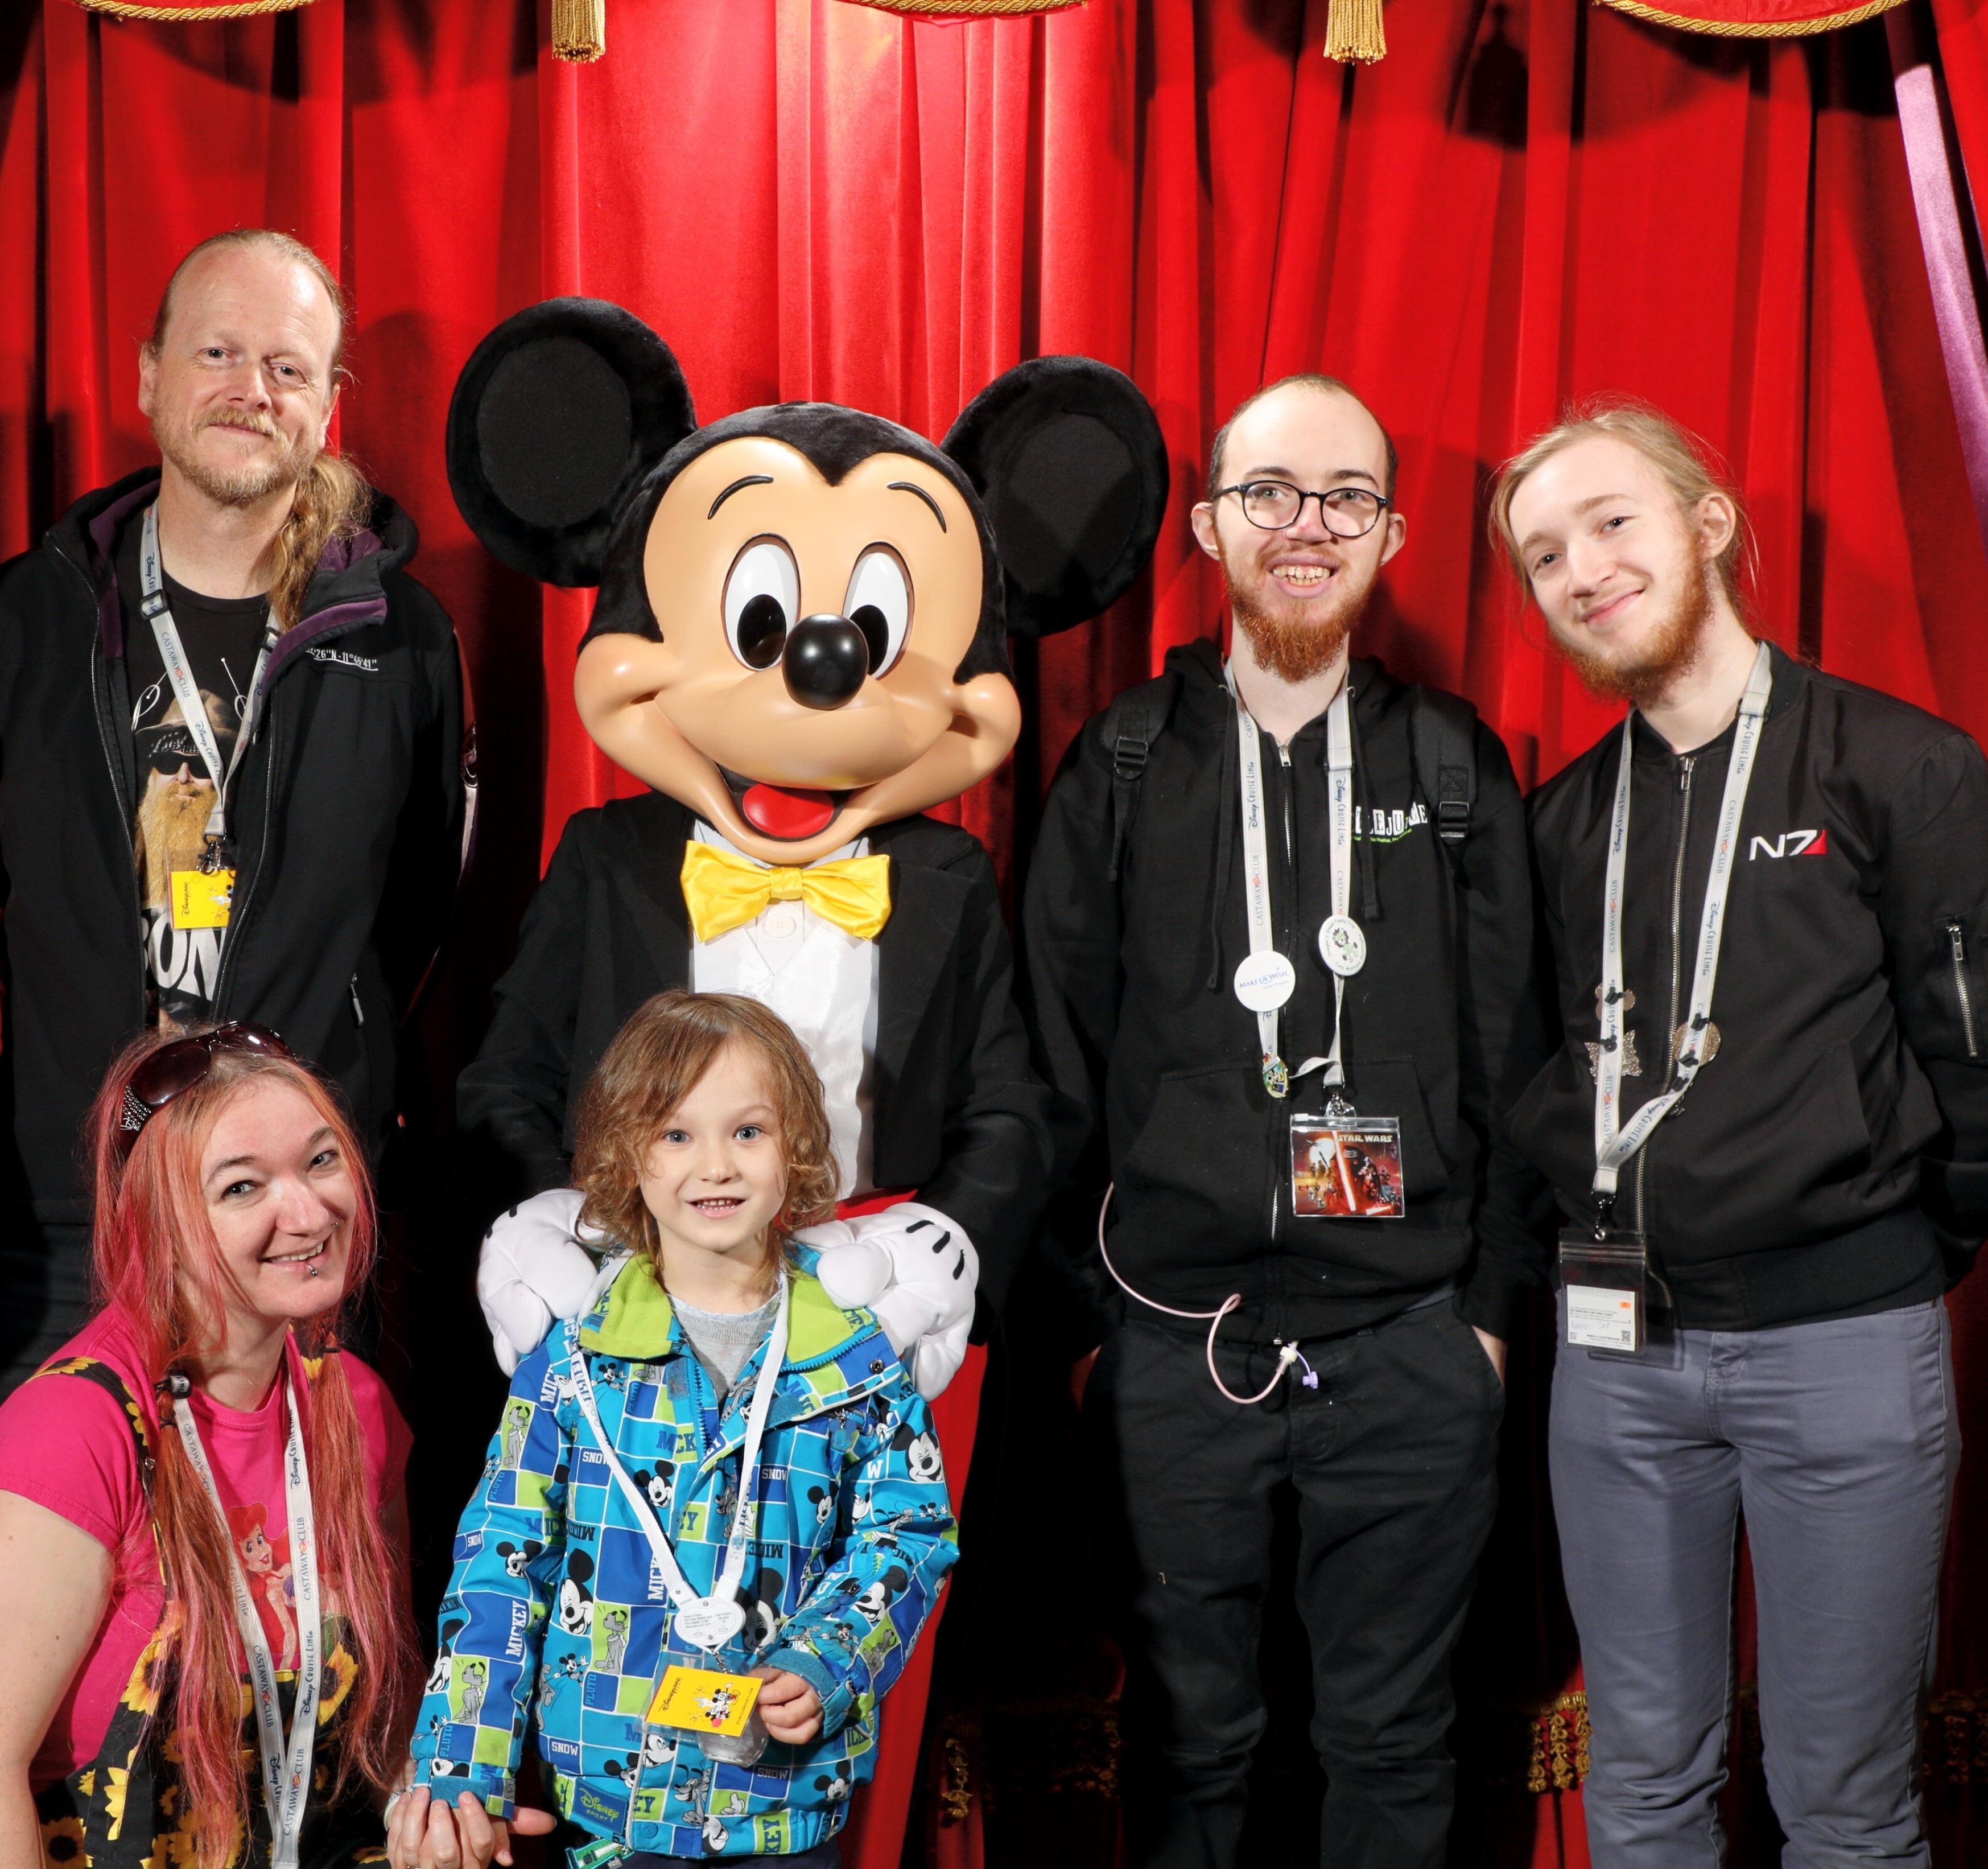 Emma-Jayne Ashley and her family are stood with Mickey Mouse